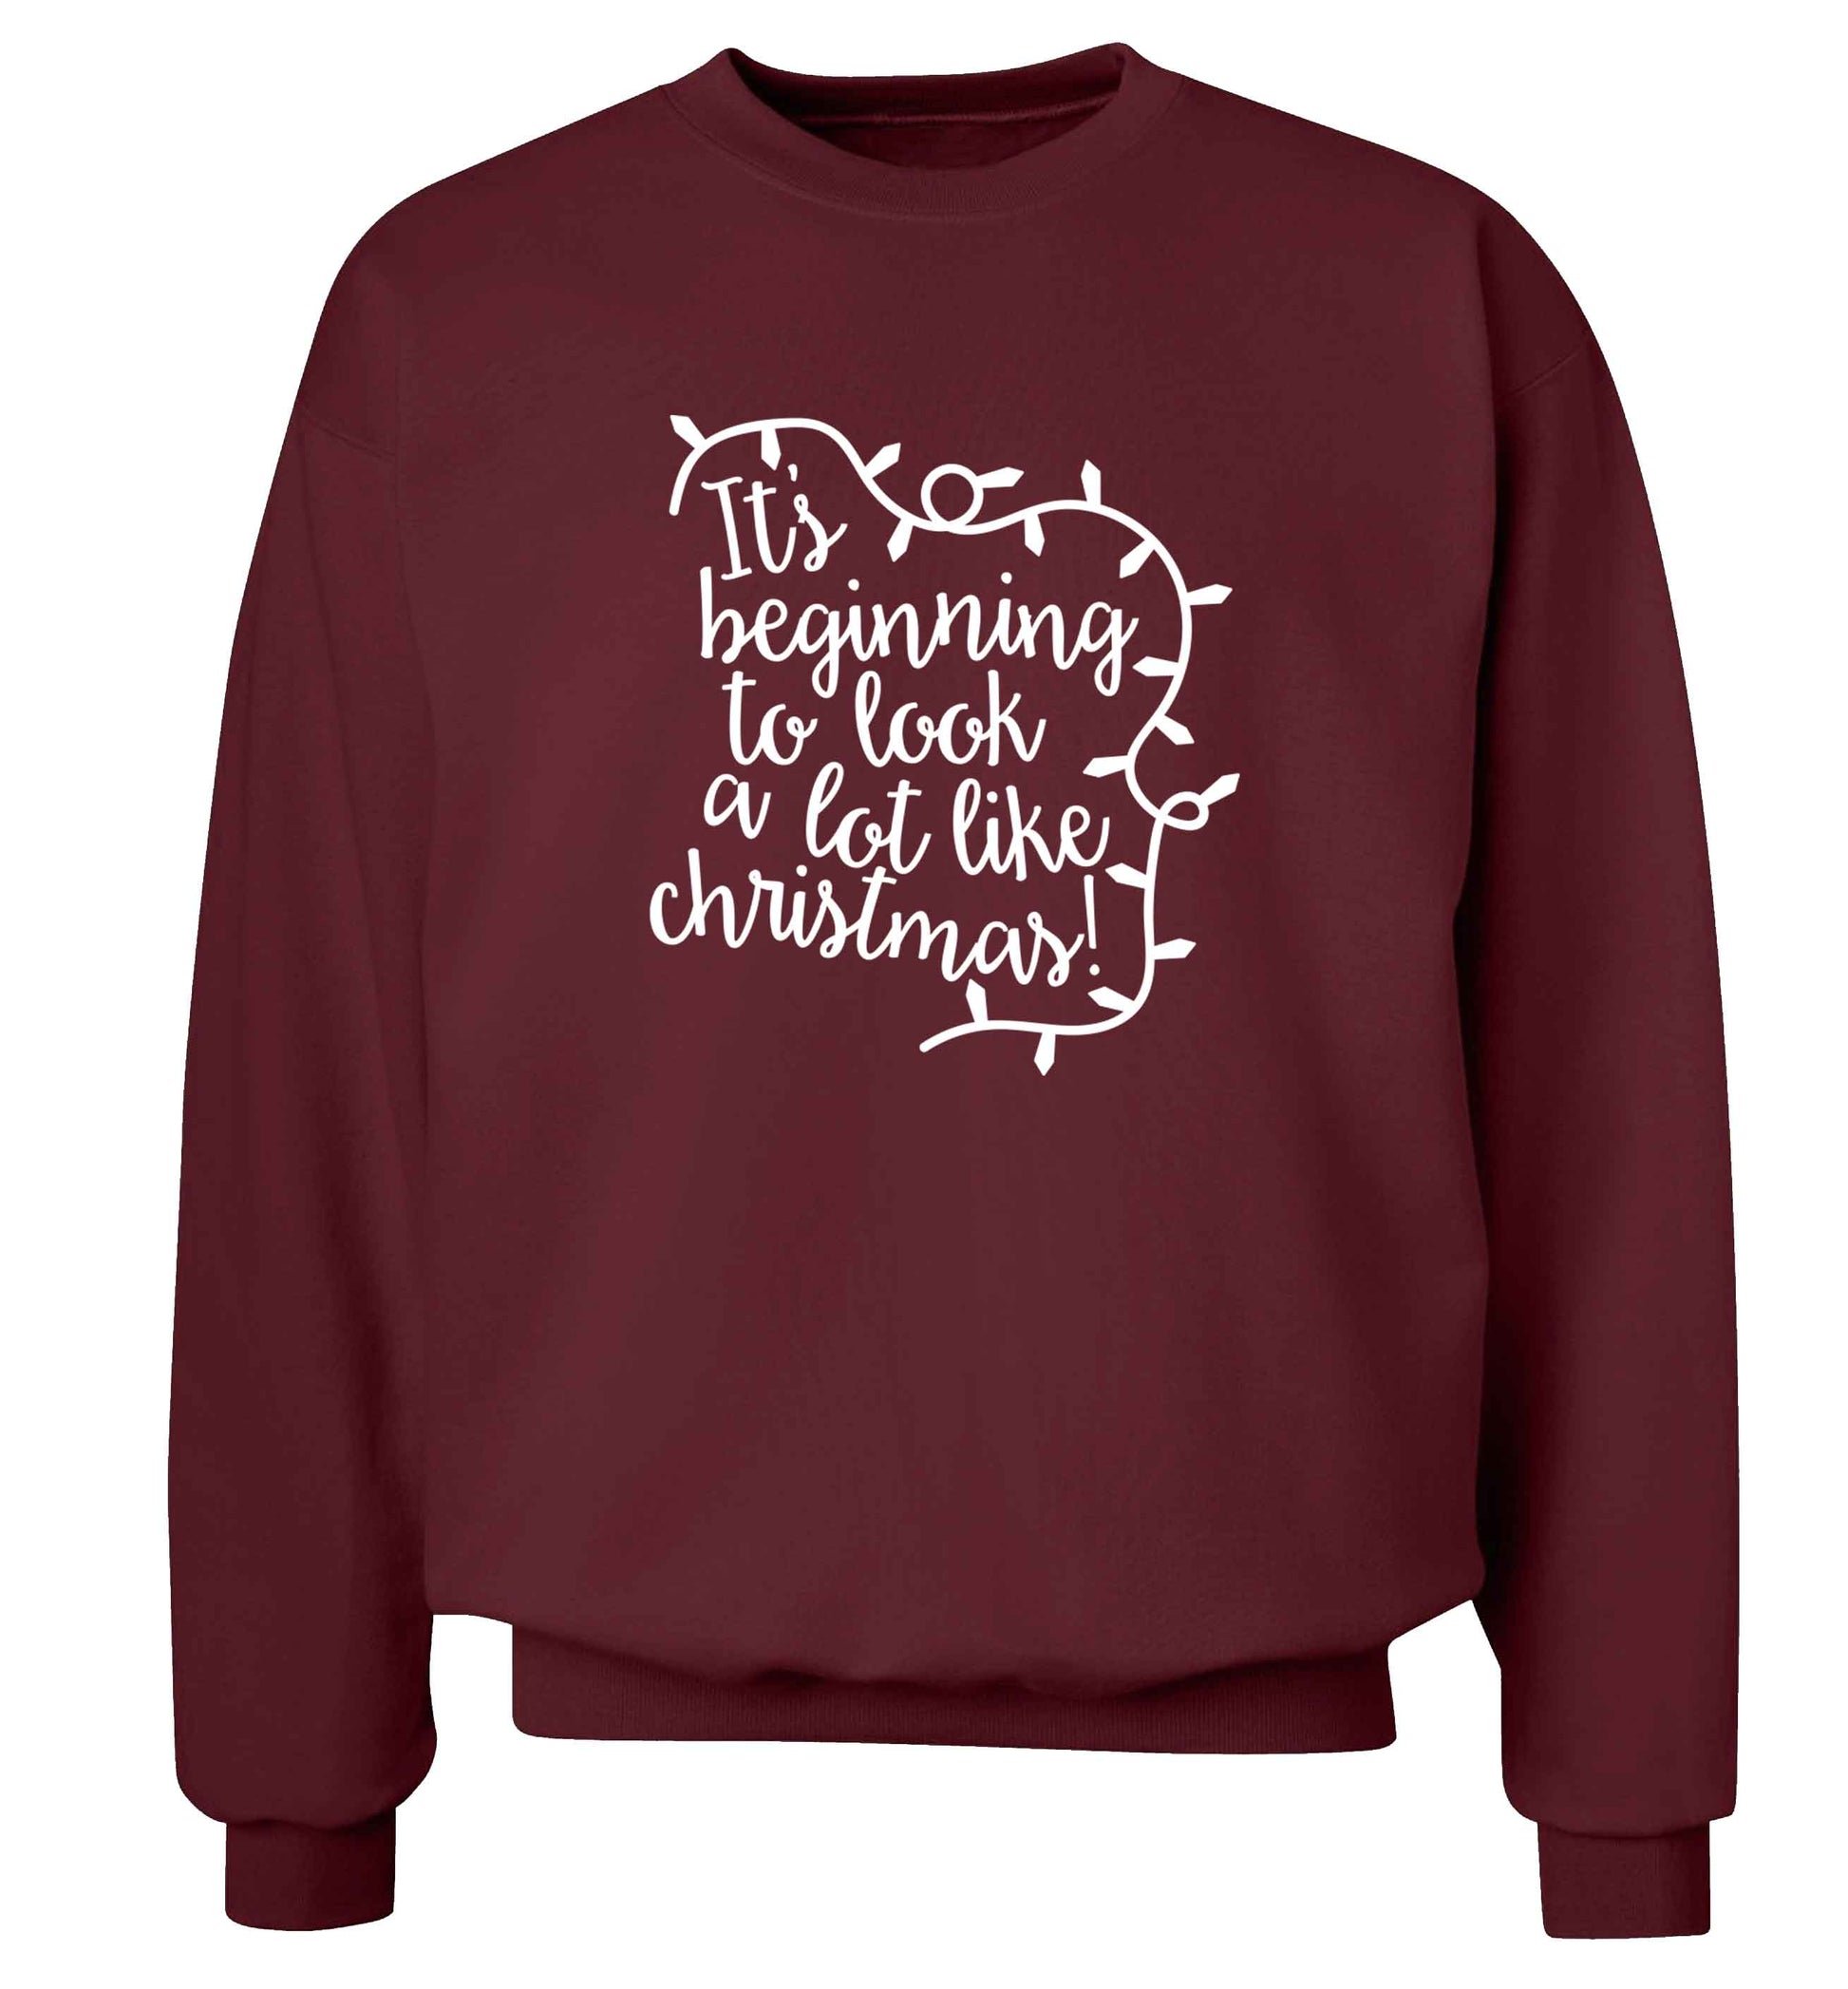 It's beginning to look a lot like Christmas adult's unisex maroon sweater 2XL